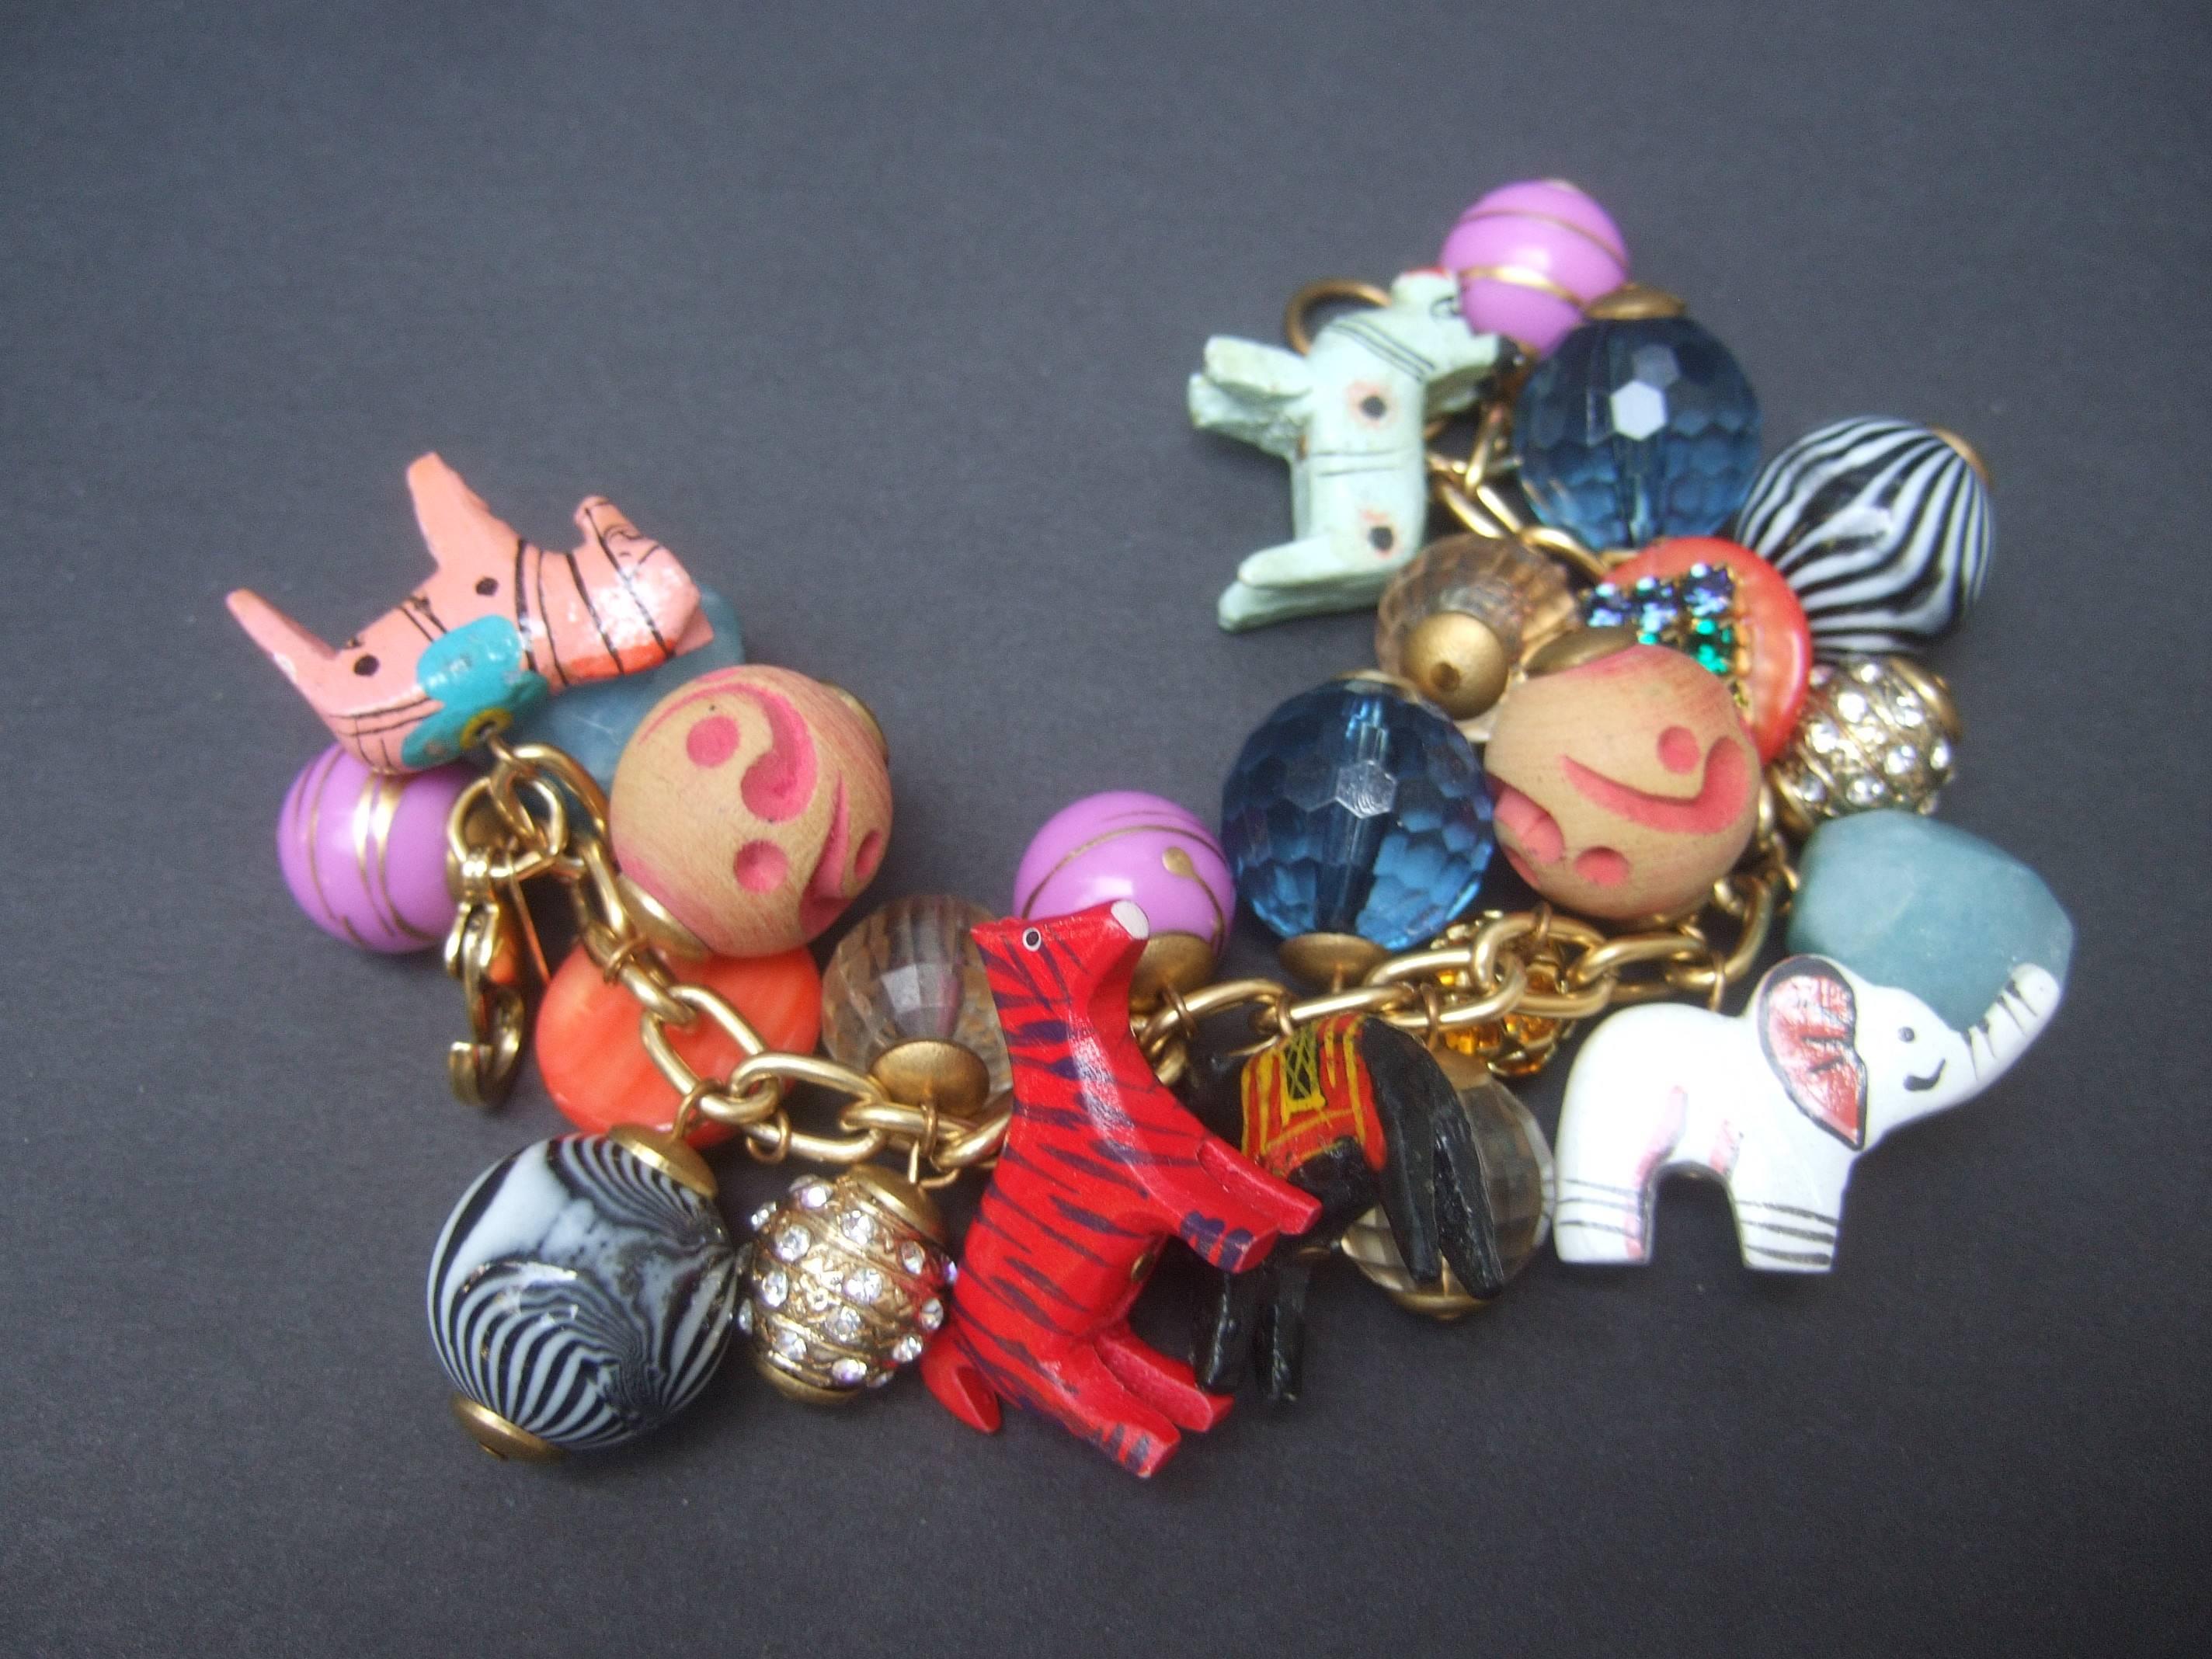 Chunky jungle animal dangling bauble charm bracelet by Lenora Dame
The unique charm bracelet is embellished with a collection  
of carved wood jungle animals with enamel detail

Elephants, zebras, horses, and canine creature charms are interspersed